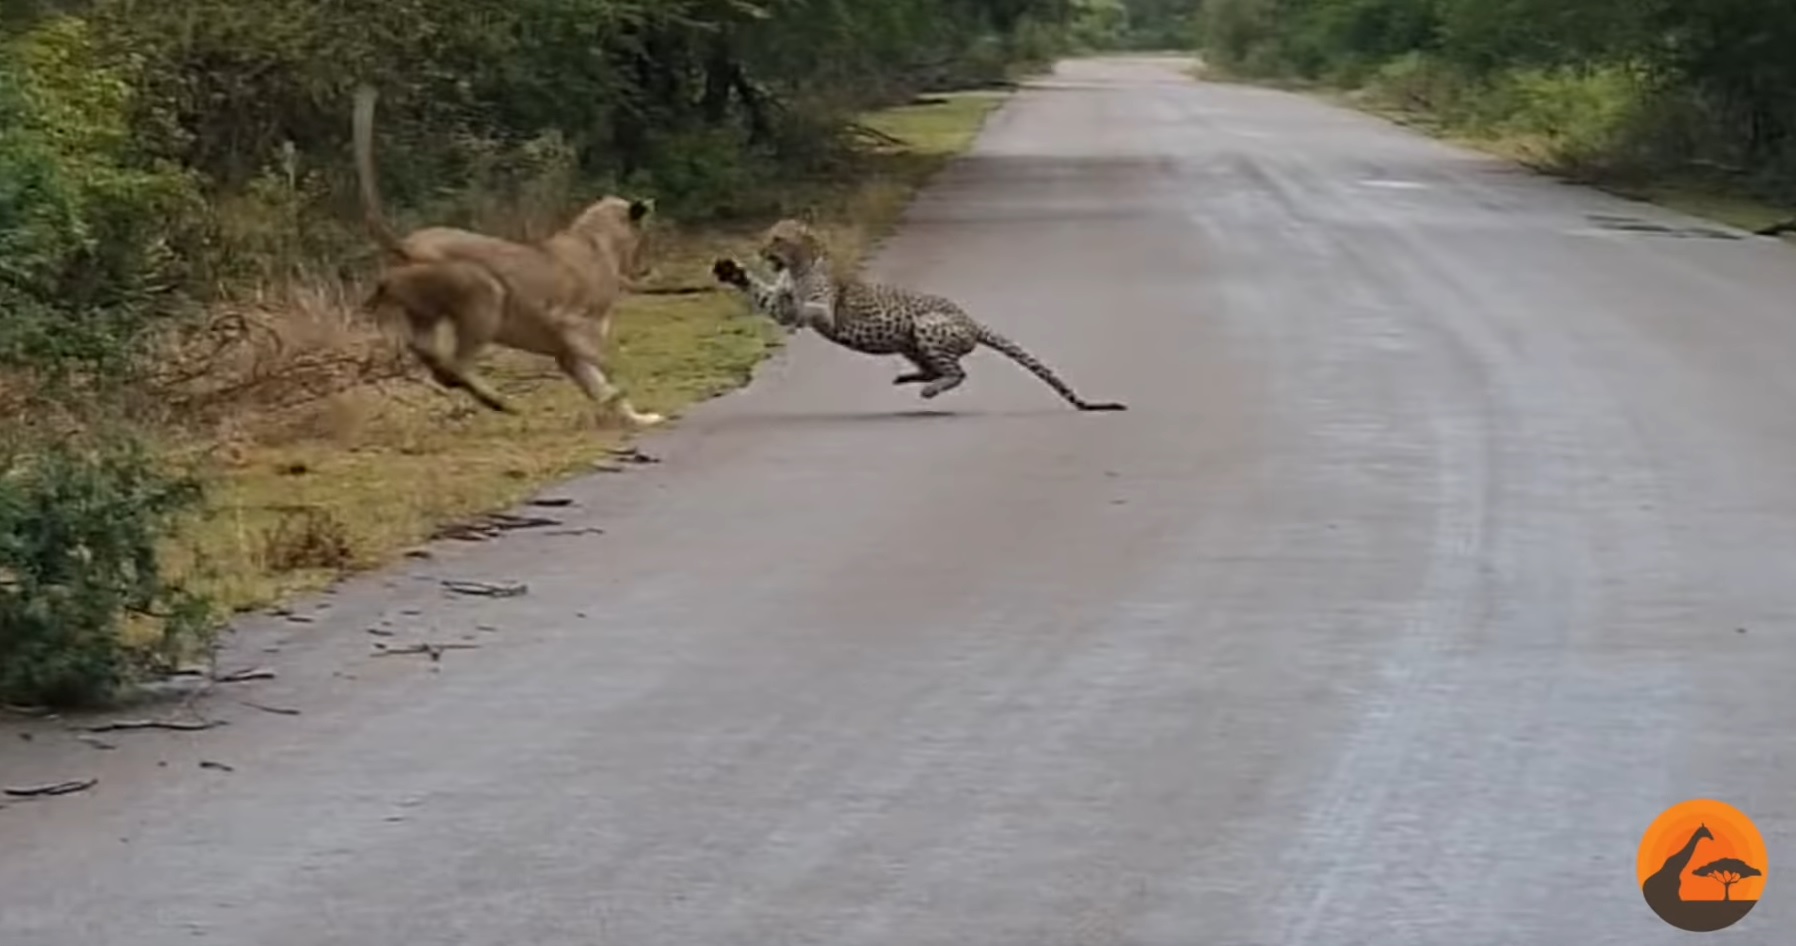 Lioness Vs Leopard On The Road